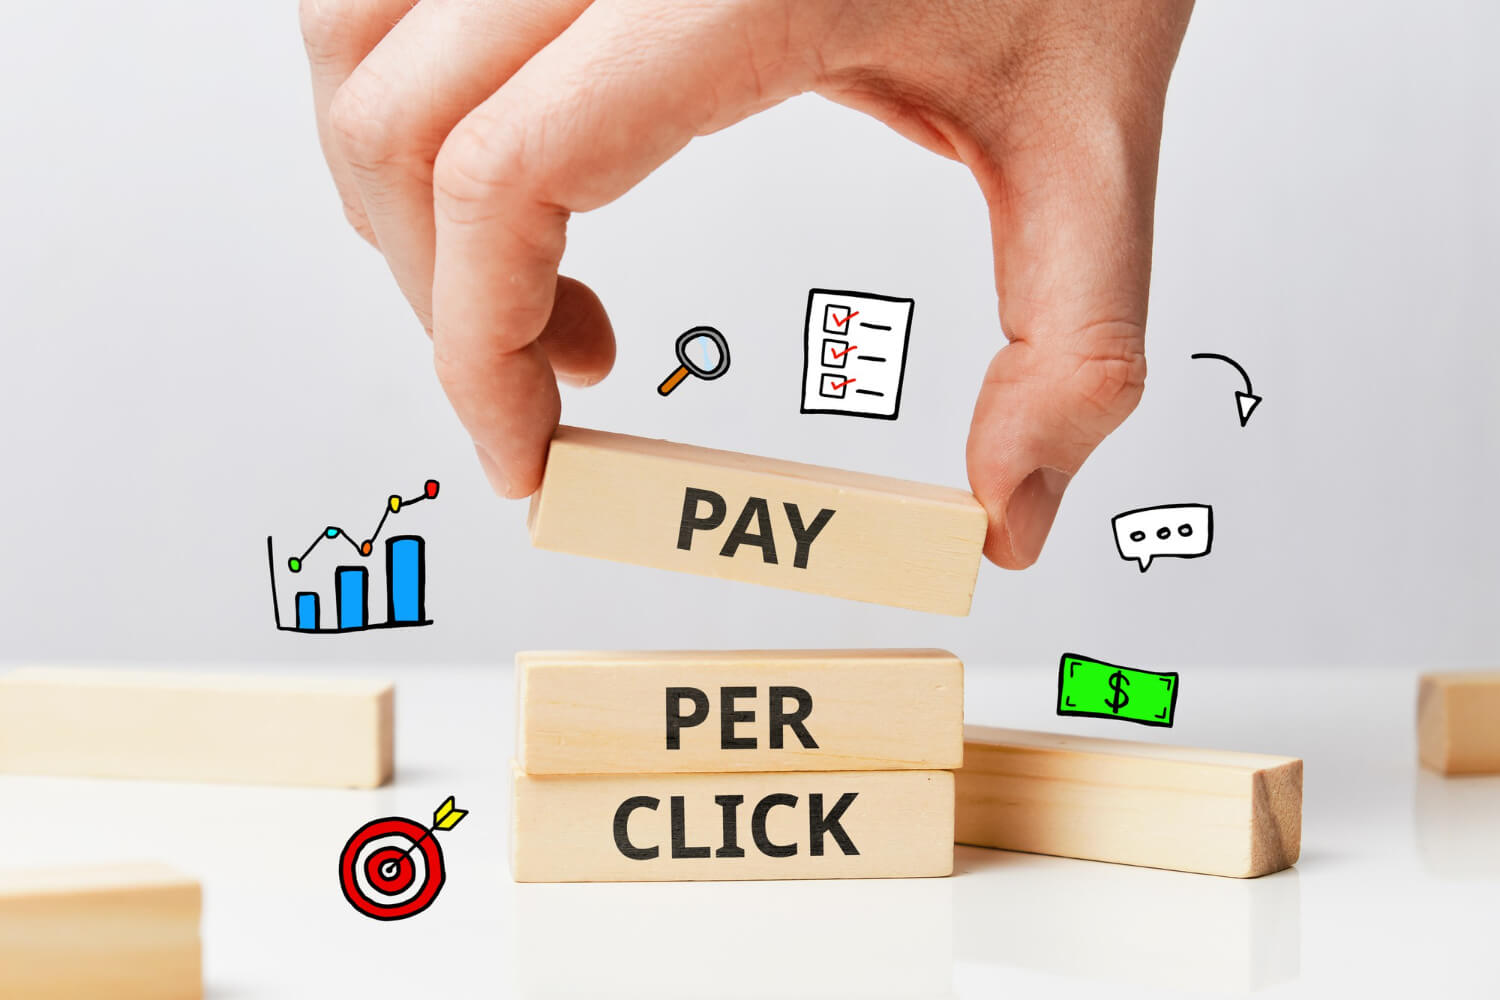 Pay-per-click (PPC) advertising